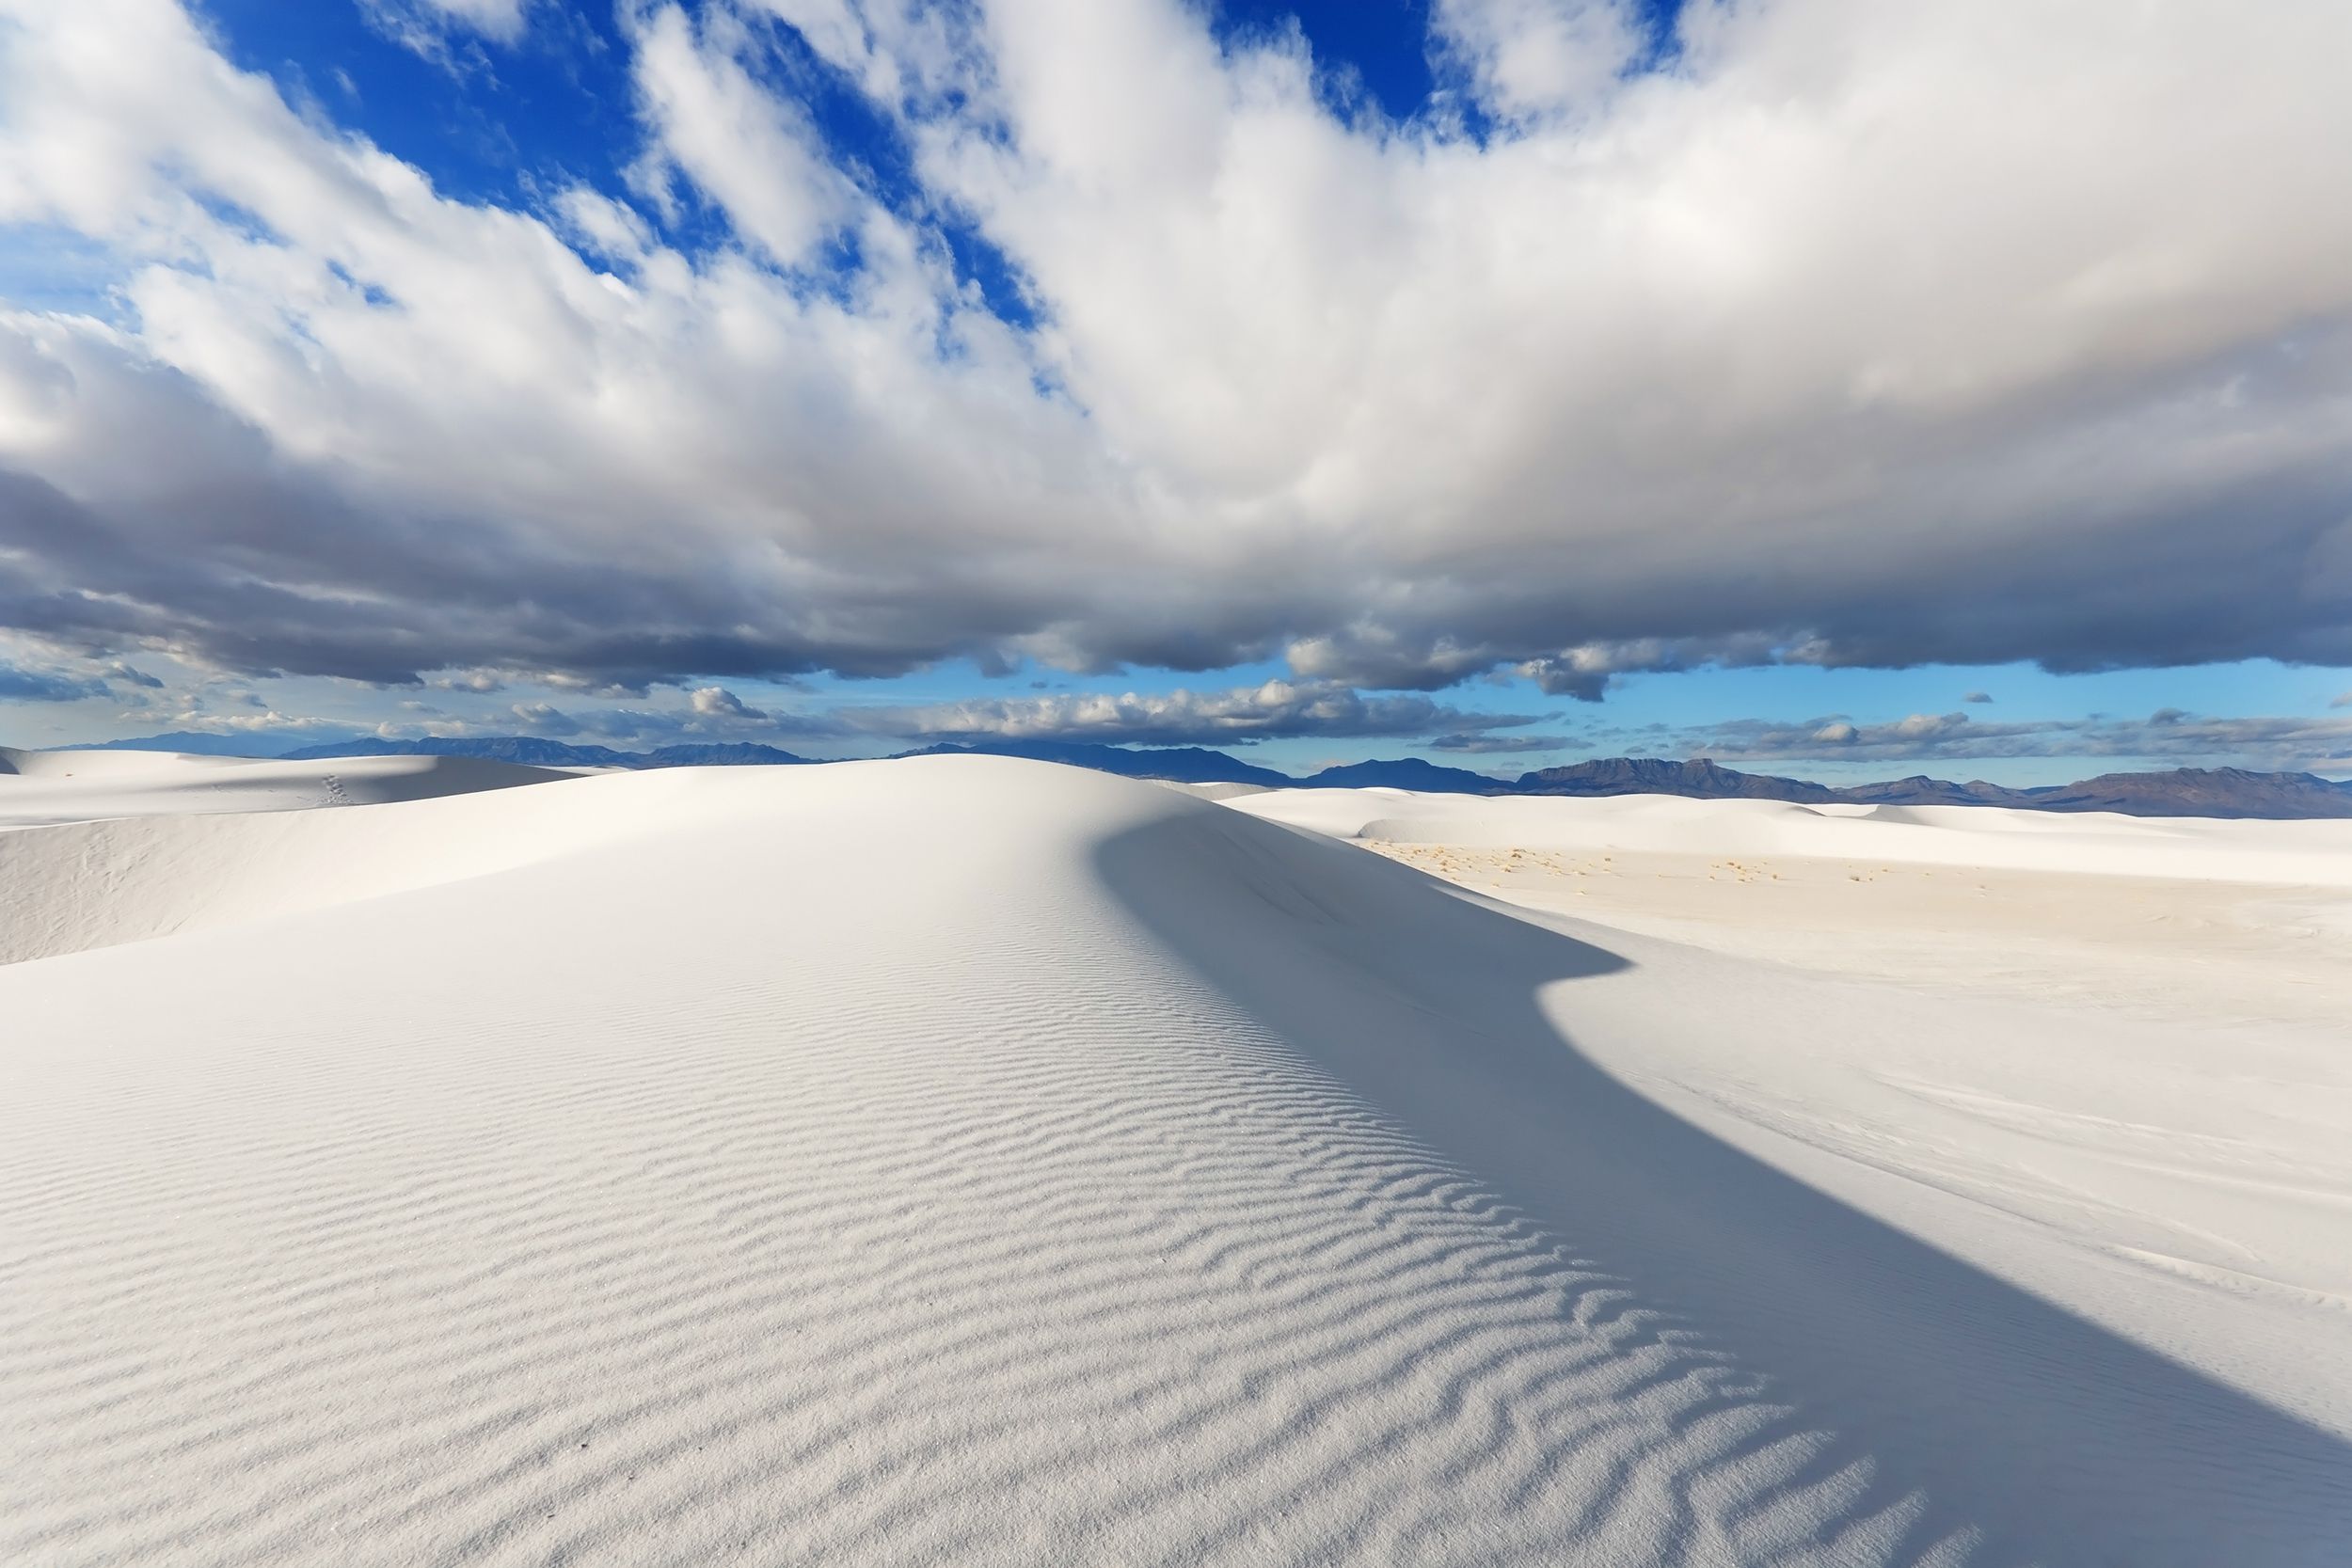 <p>One of the most recent additions to our national park system, <a href="https://www.nps.gov/whsa/index.htm">White Sands National Park</a> is made up of 275 square miles of blindingly white gypsum sand dunes. The largest gypsum dunefield on the planet, this park is also home to many plants and animals that have adapted to survive in such a harsh environment.</p>